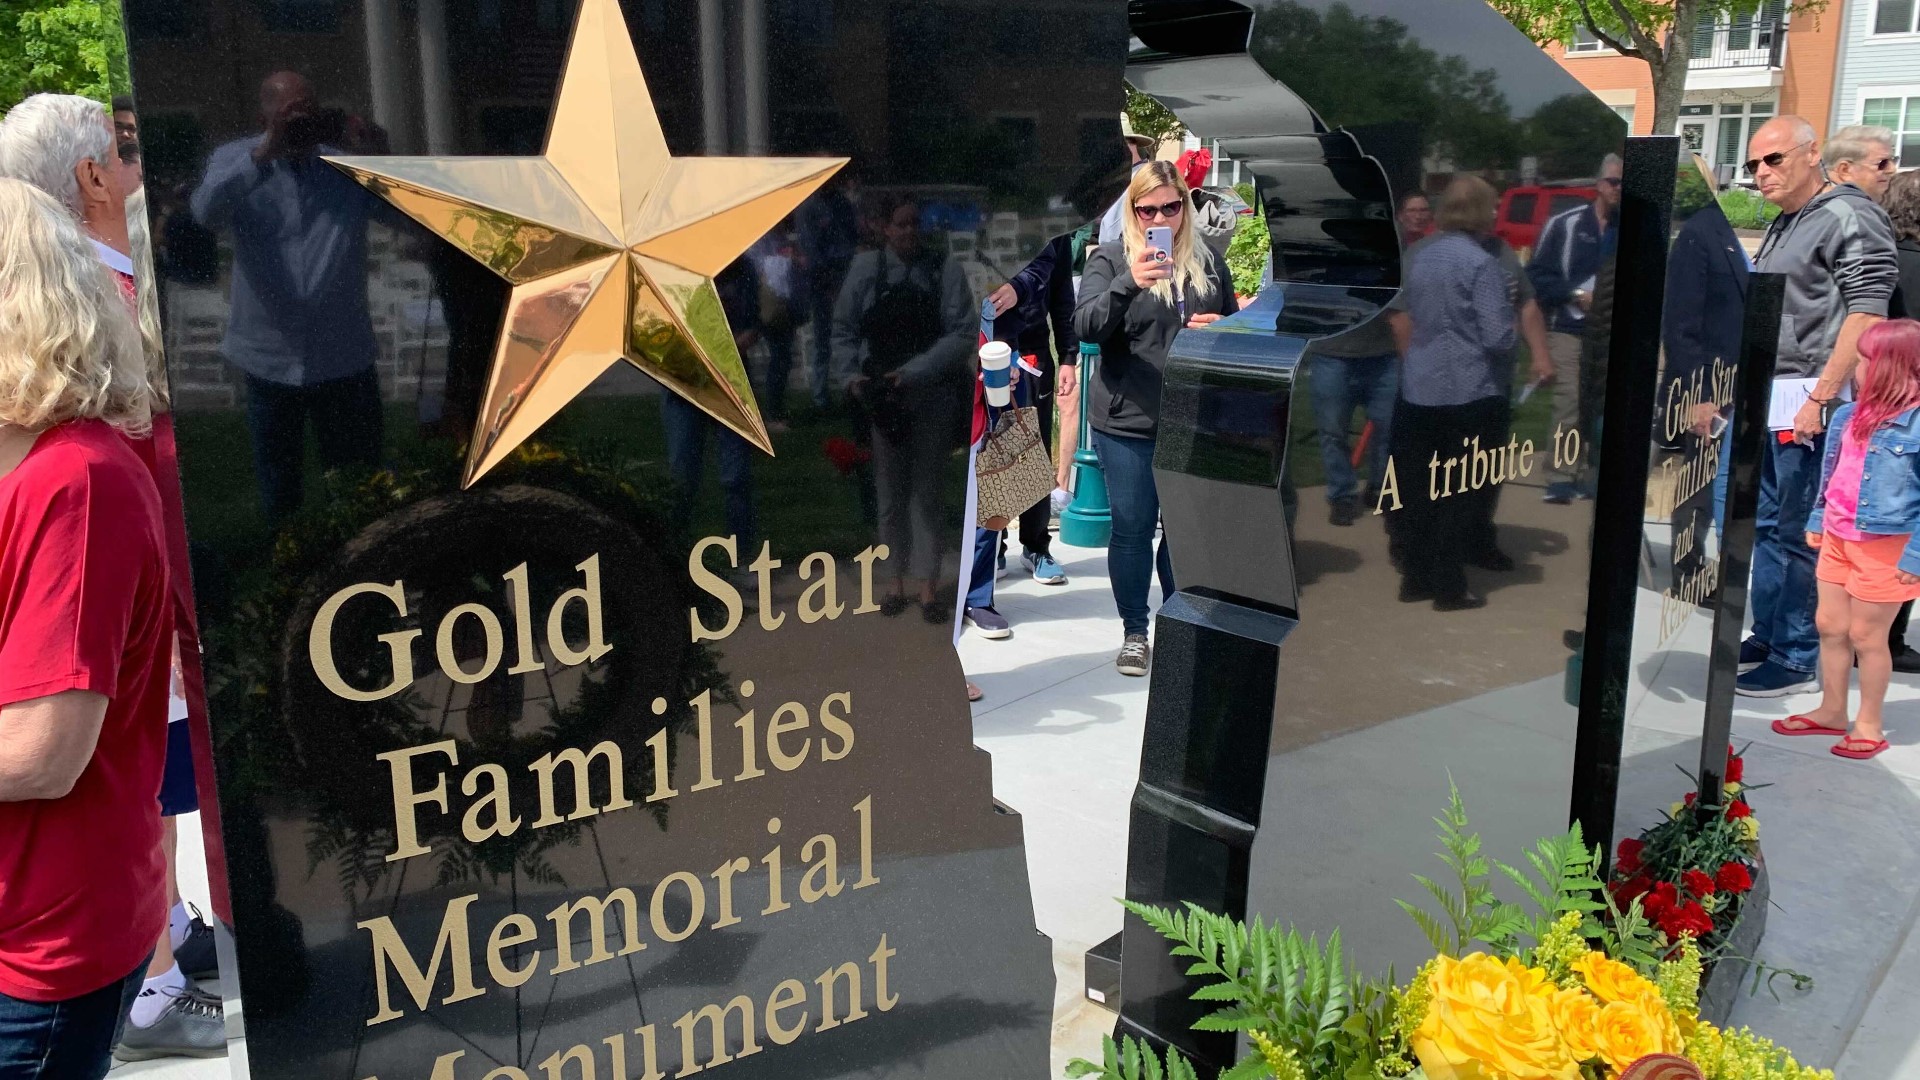 The monument outside City Hall makes sure surviving military family members are not neglected.